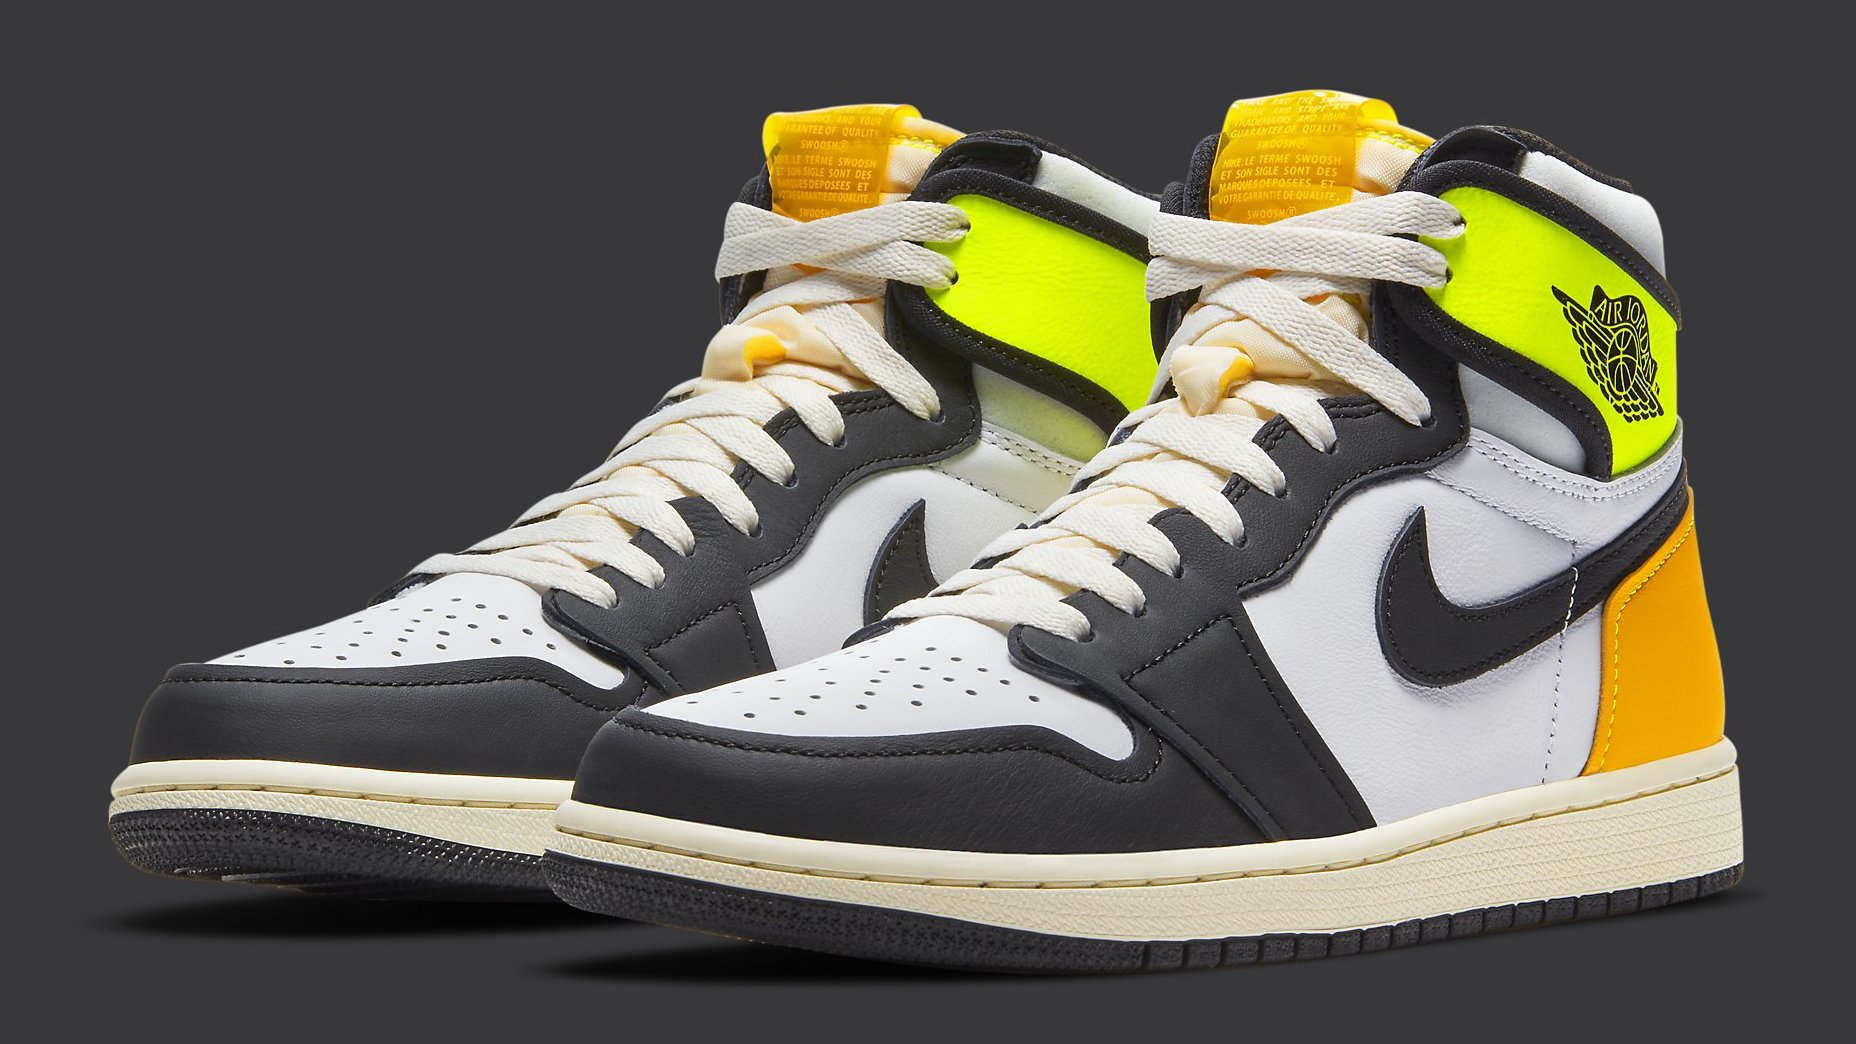 The 'Volt Gold' Jordan 1 High Is Releasing in Early 2021 Complex